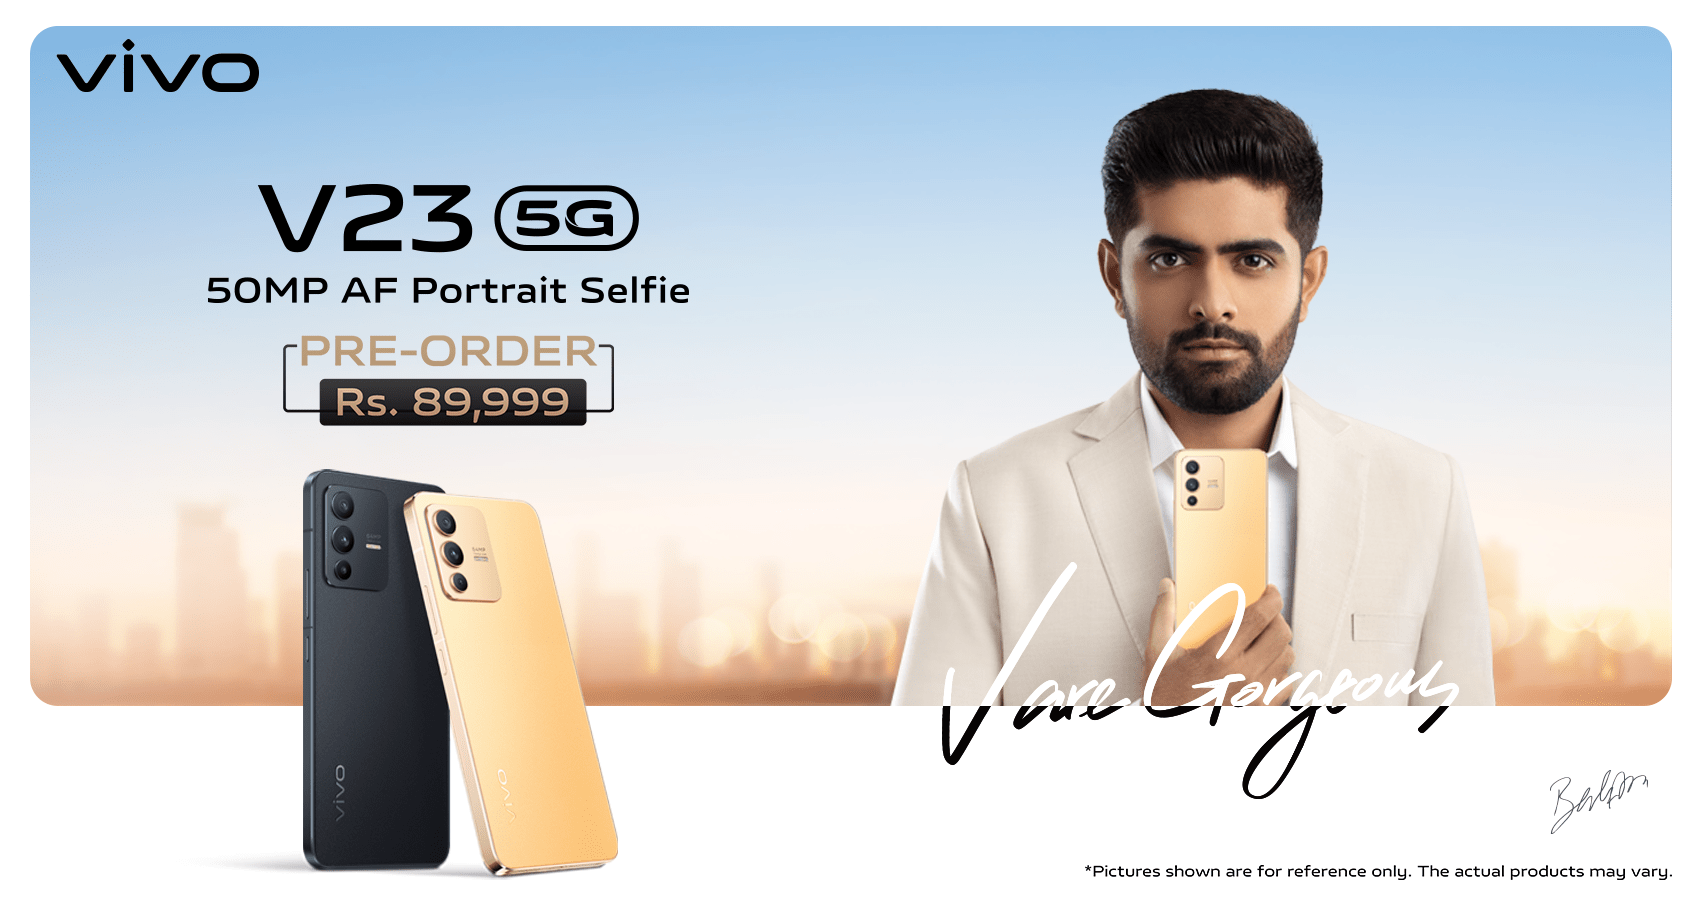 vivo V23 5G Launched in Pakistan — Featuring Amazing Portrait Selfie, Distinctive Design and Effortless High Speed 5G Performance